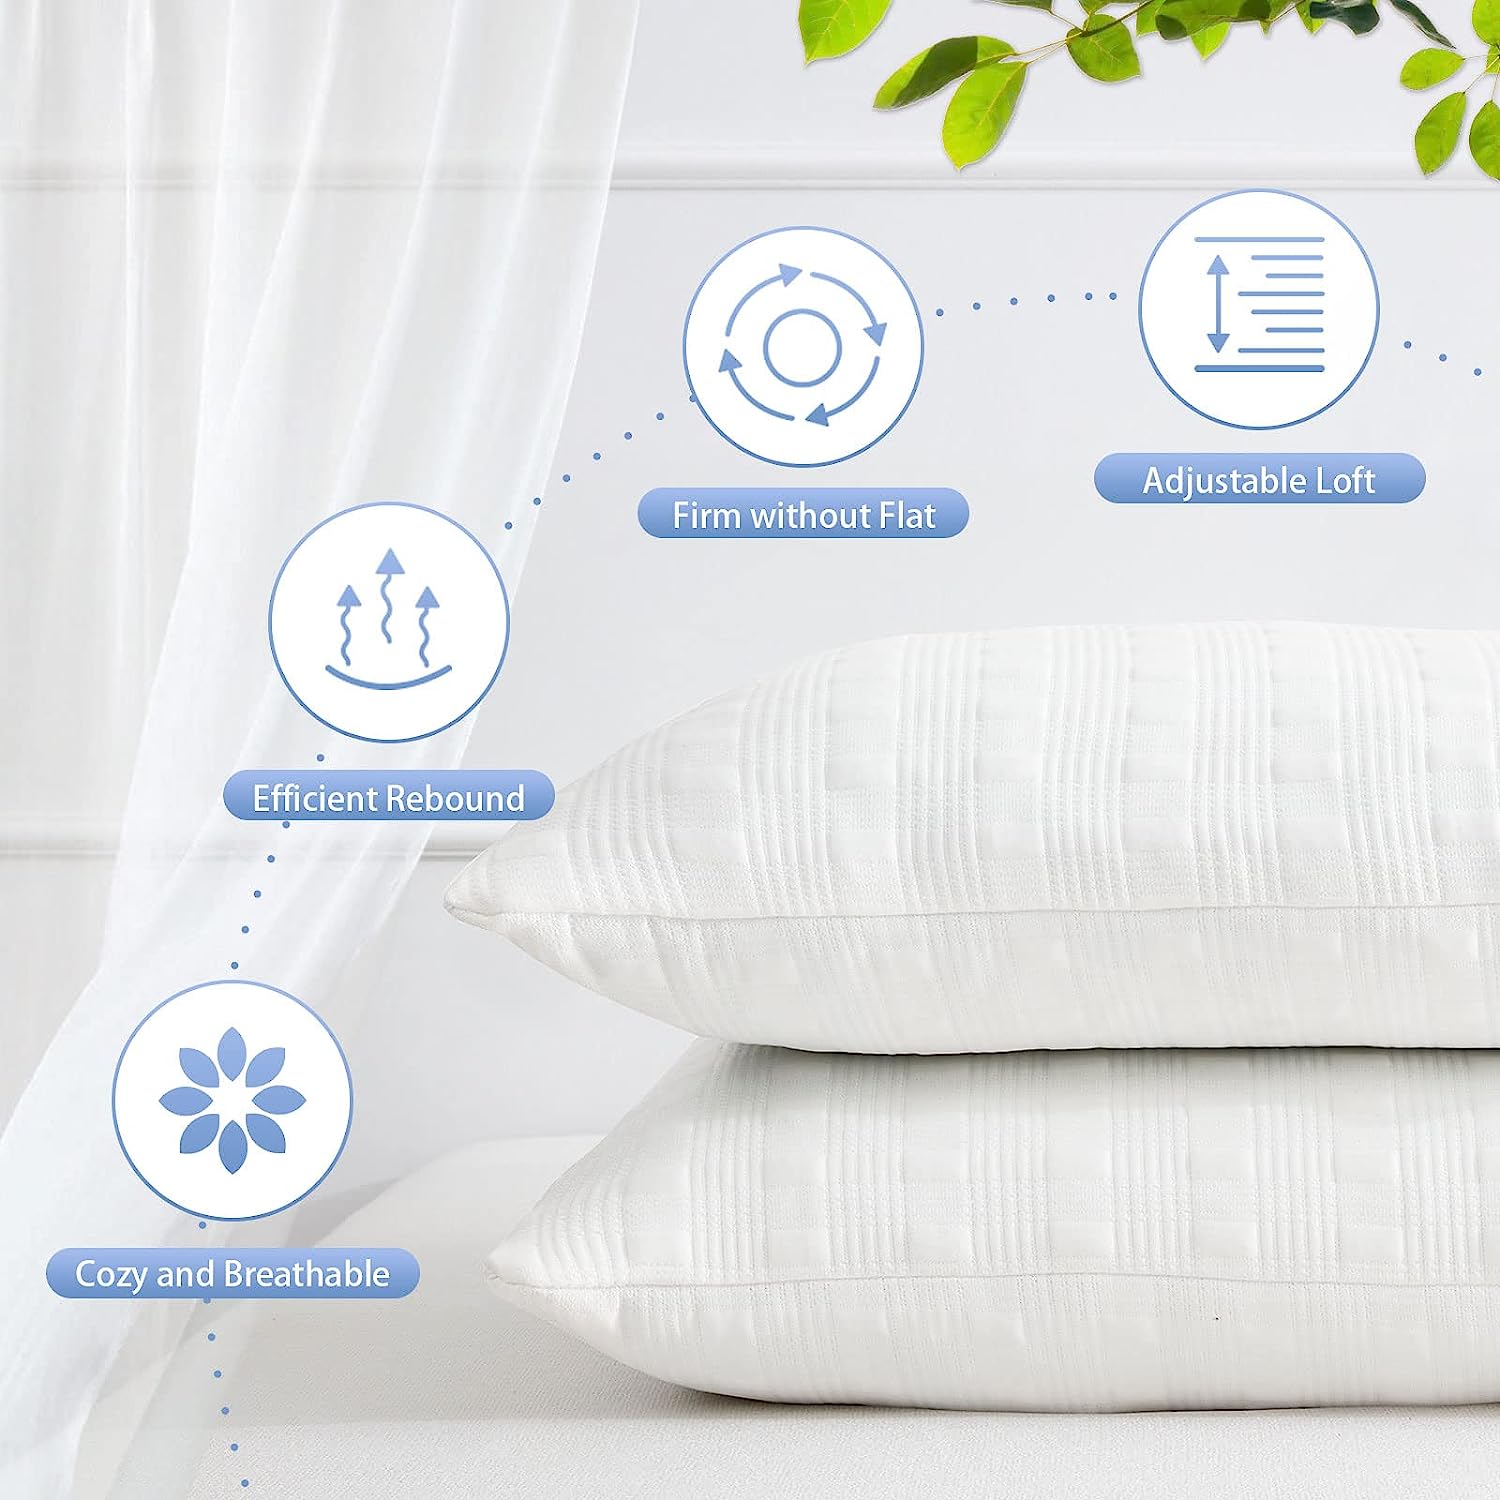 https://bigbigmart.com/wp-content/uploads/2023/08/Meoflaw-Cooling-Pillows-for-Sleeping-King-Size-Set-of-2Shredded-Memory-Foam-Bed-Pillow-with-Pillow-Case-Double-Sided-MaterialAdjustable-Loft-King-Pillow-for-Side-Back-Sleeper-Medium-Firm2.jpg